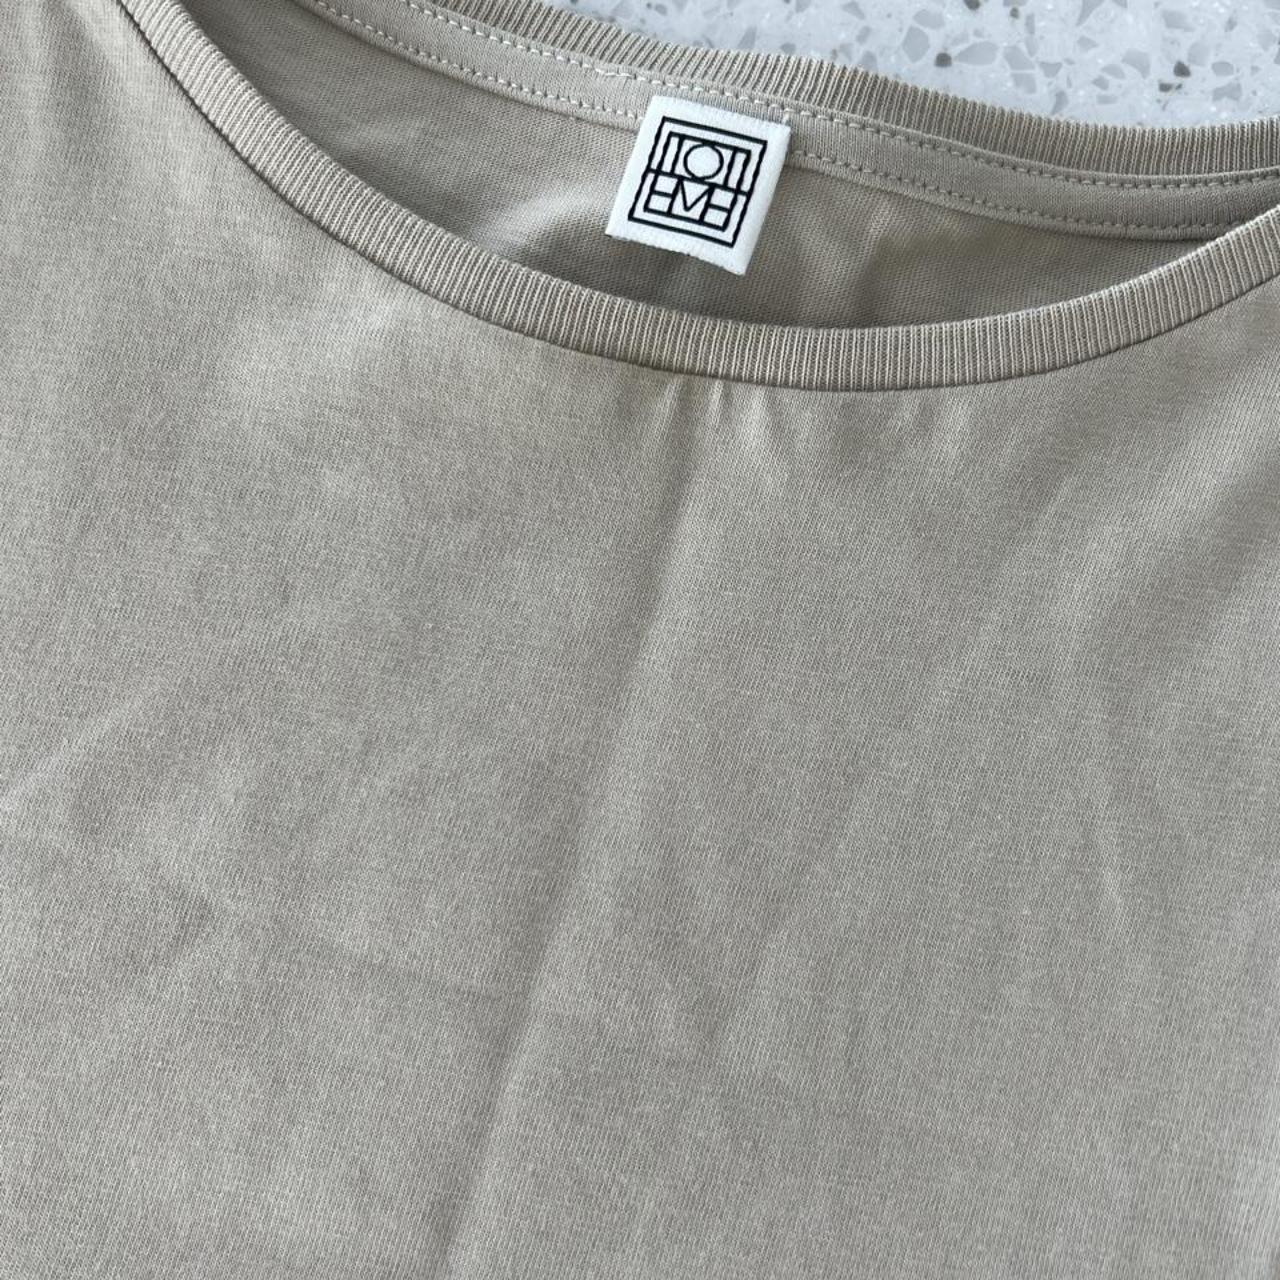 Toteme Clay t shirt. Size M. - Depop